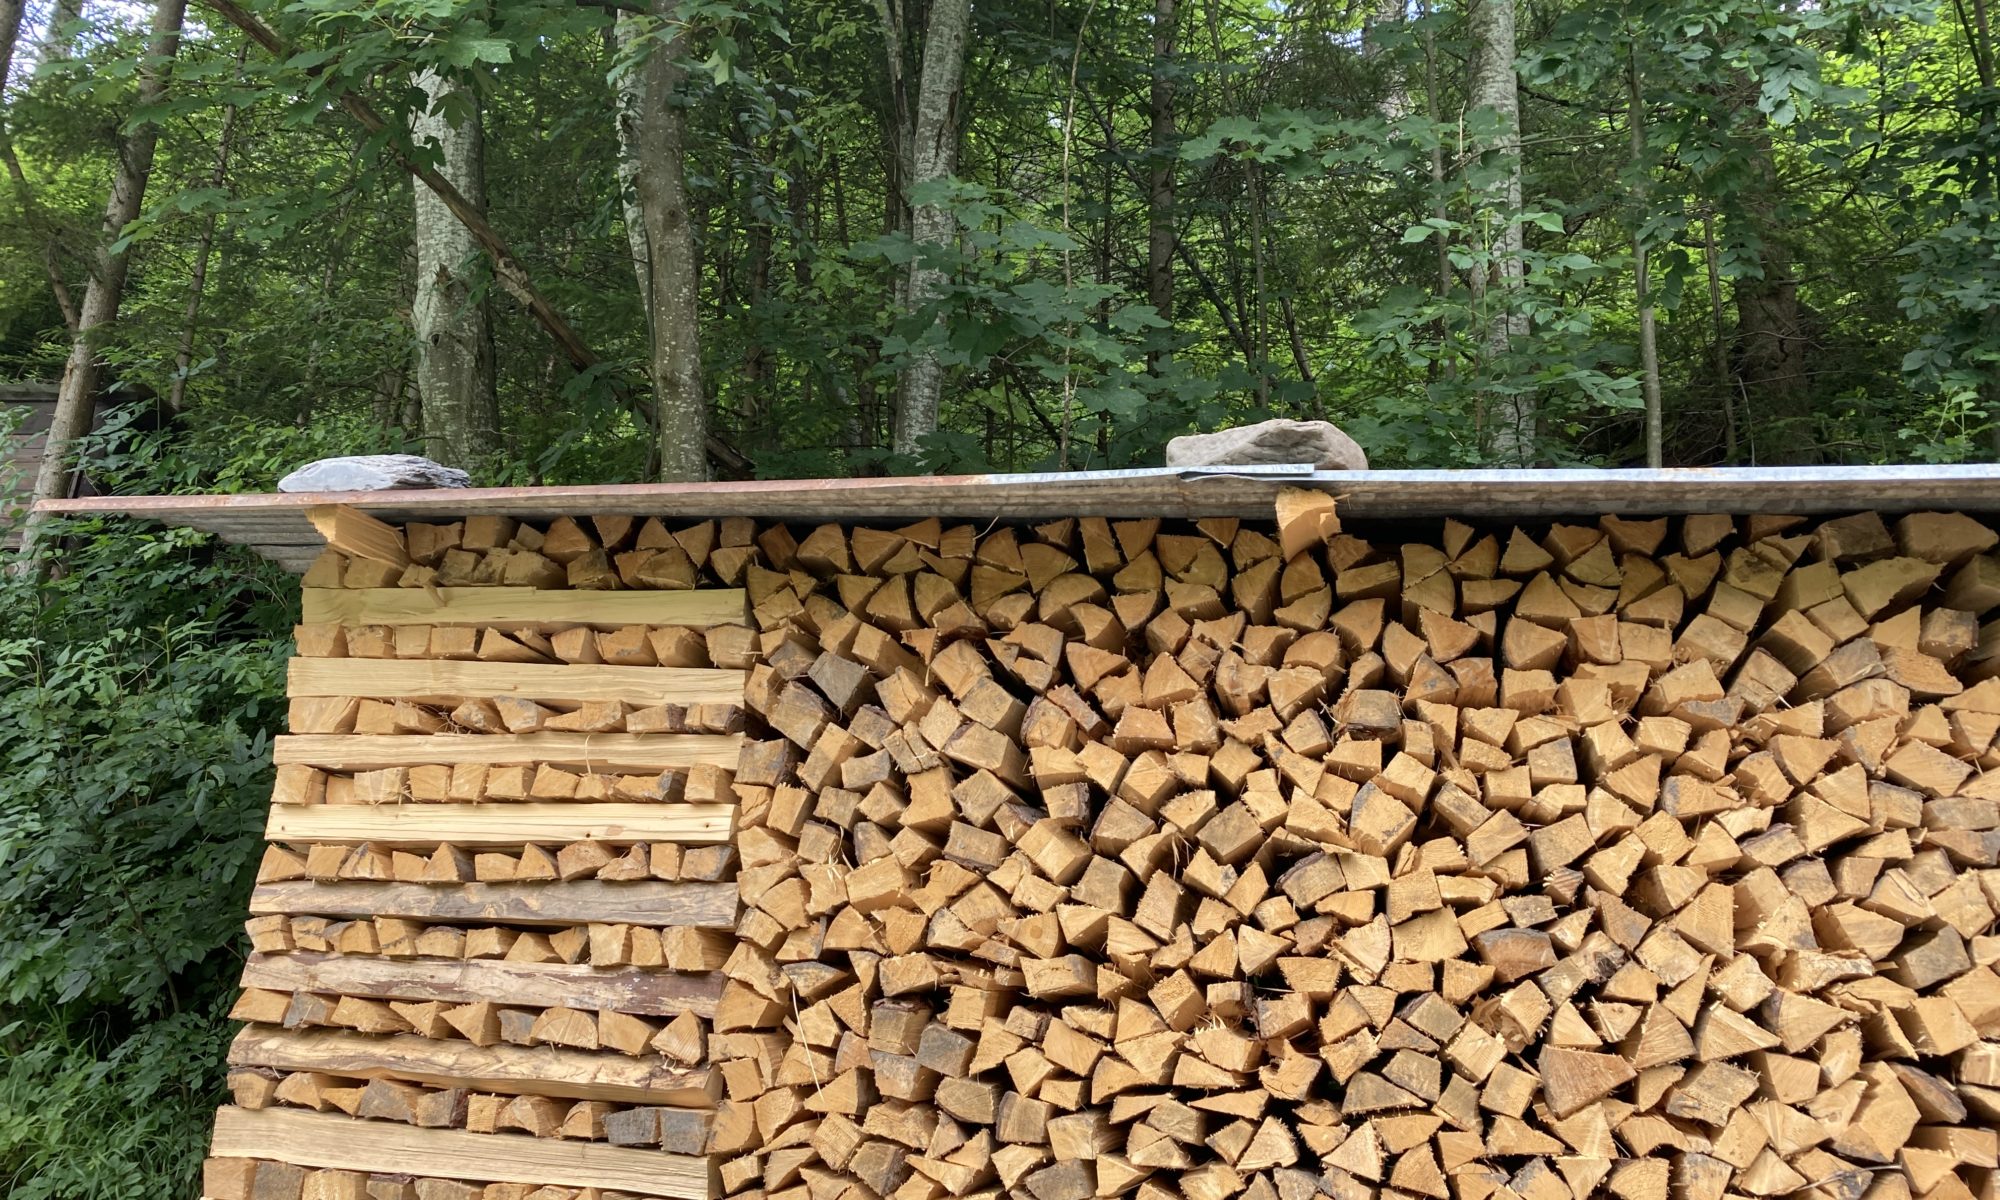 Neatly stacked logs in a forest